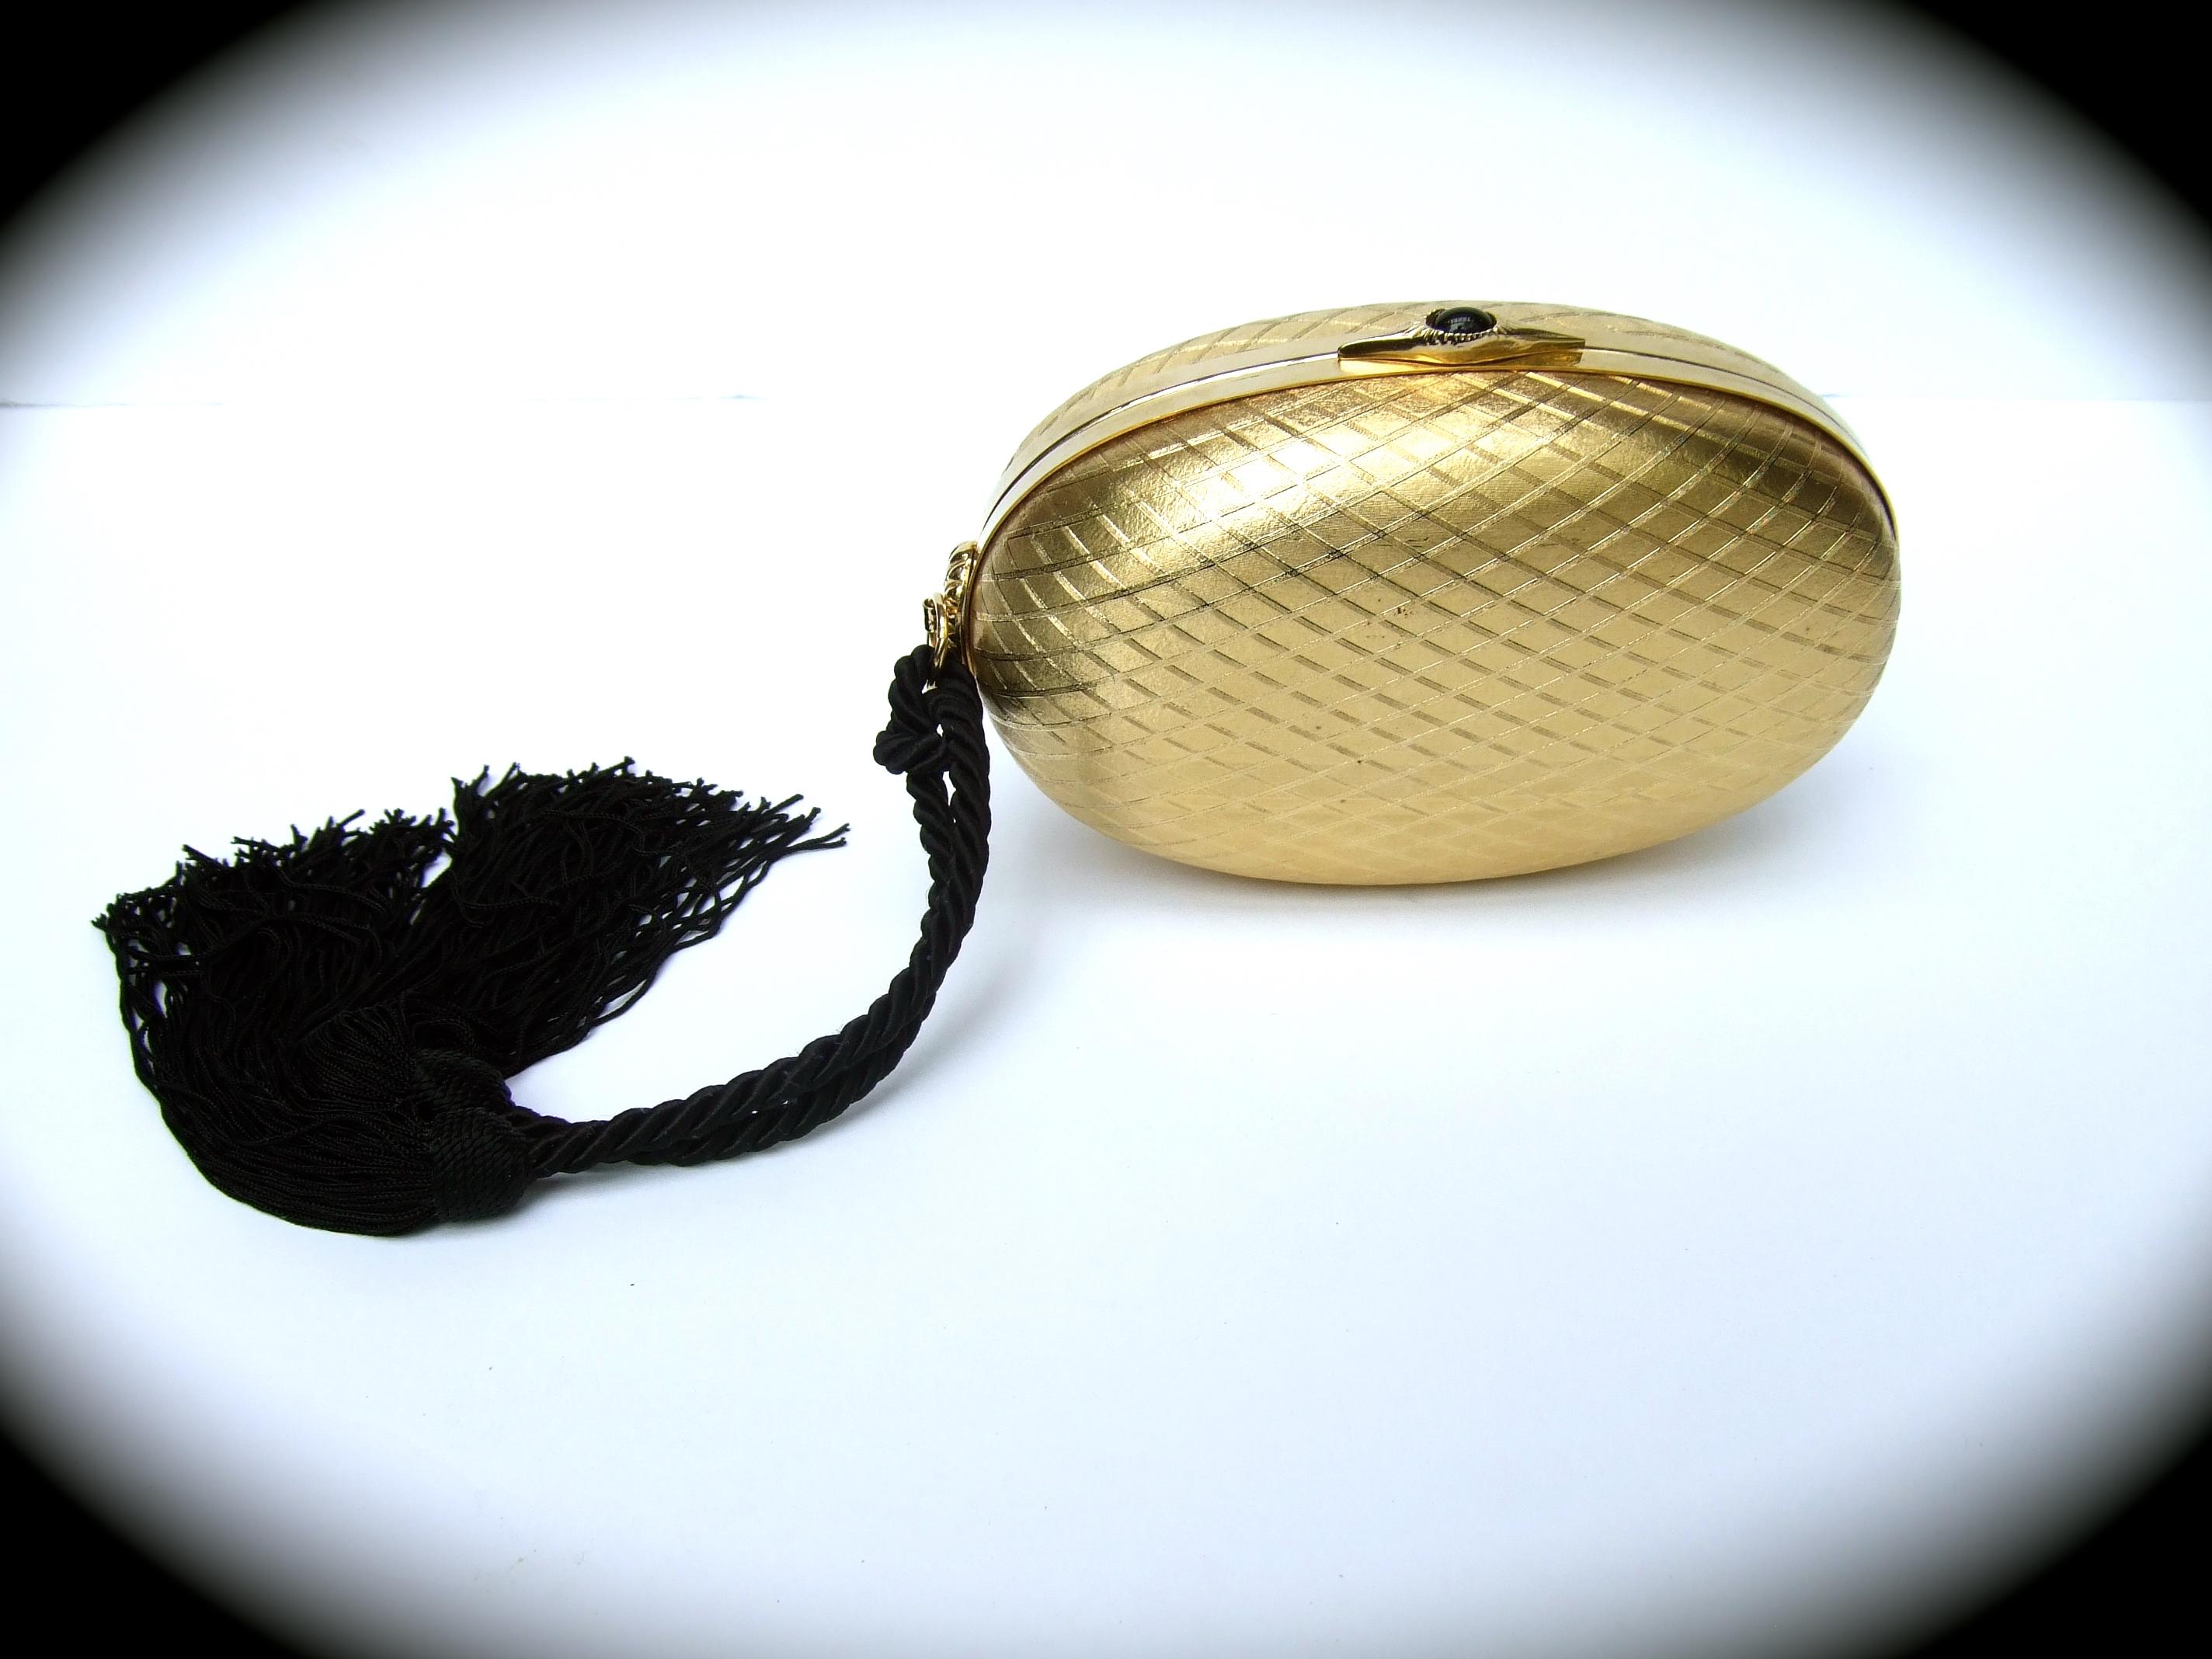 Saks Fifth Avenue Italian gilt metal tassel minaudiere' evening bag c 1970s 
The elegant oval shaped evening bag is designed with a subtle criss cross 
geometric diamond shaped covering 

Adorned with a black fringe rope tassel on one side. The